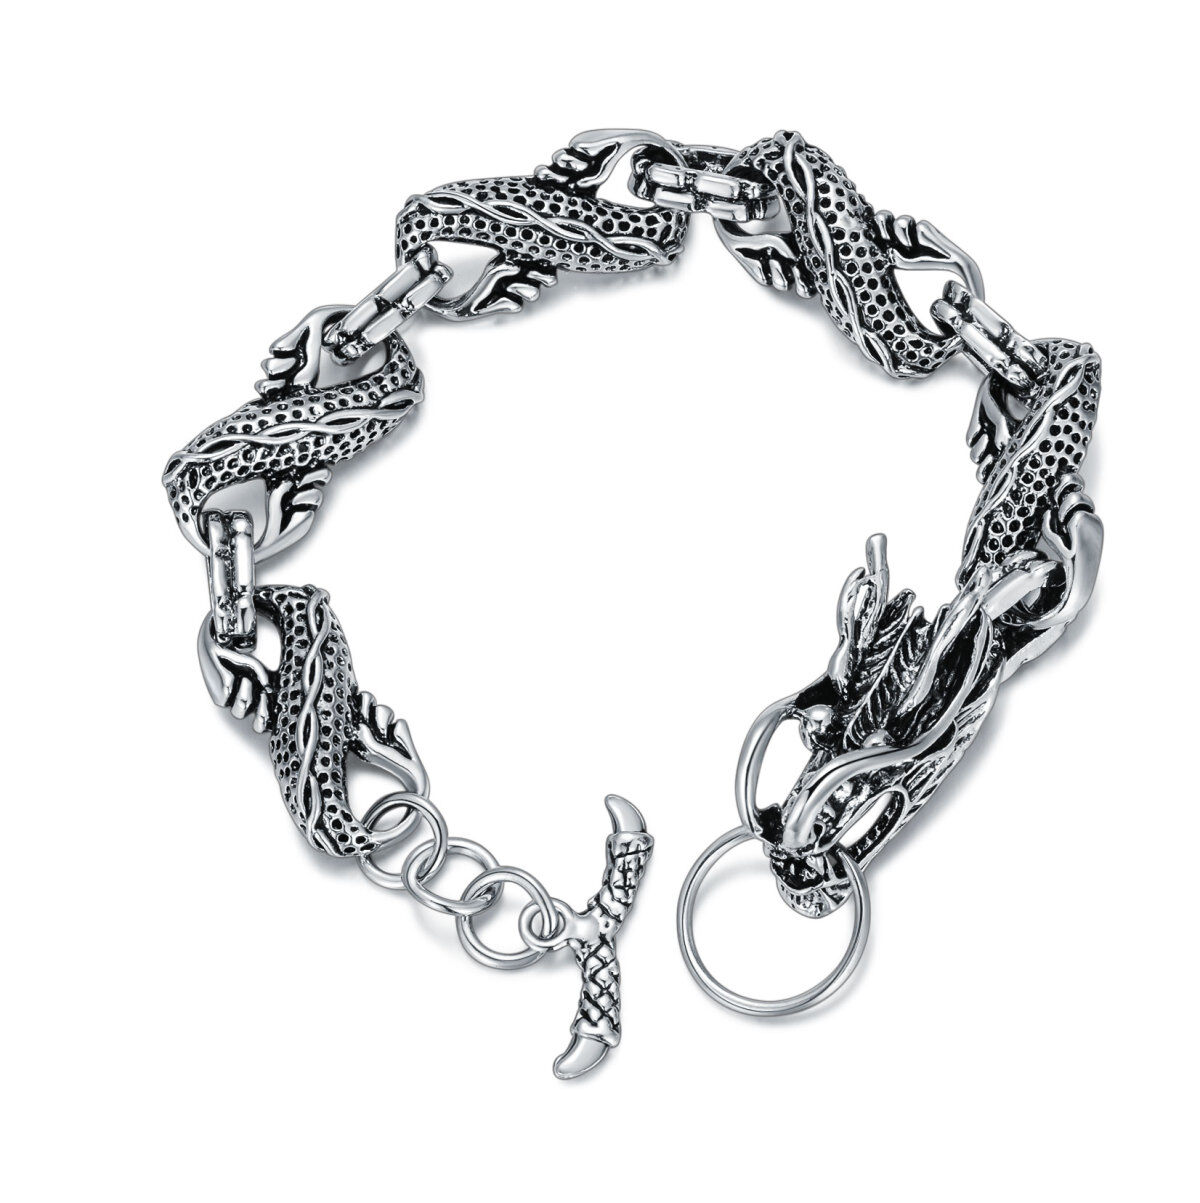 Stainless Steel with Retro Silver Plated Dragon & Viking Rune Chain Bracelet for Men-1